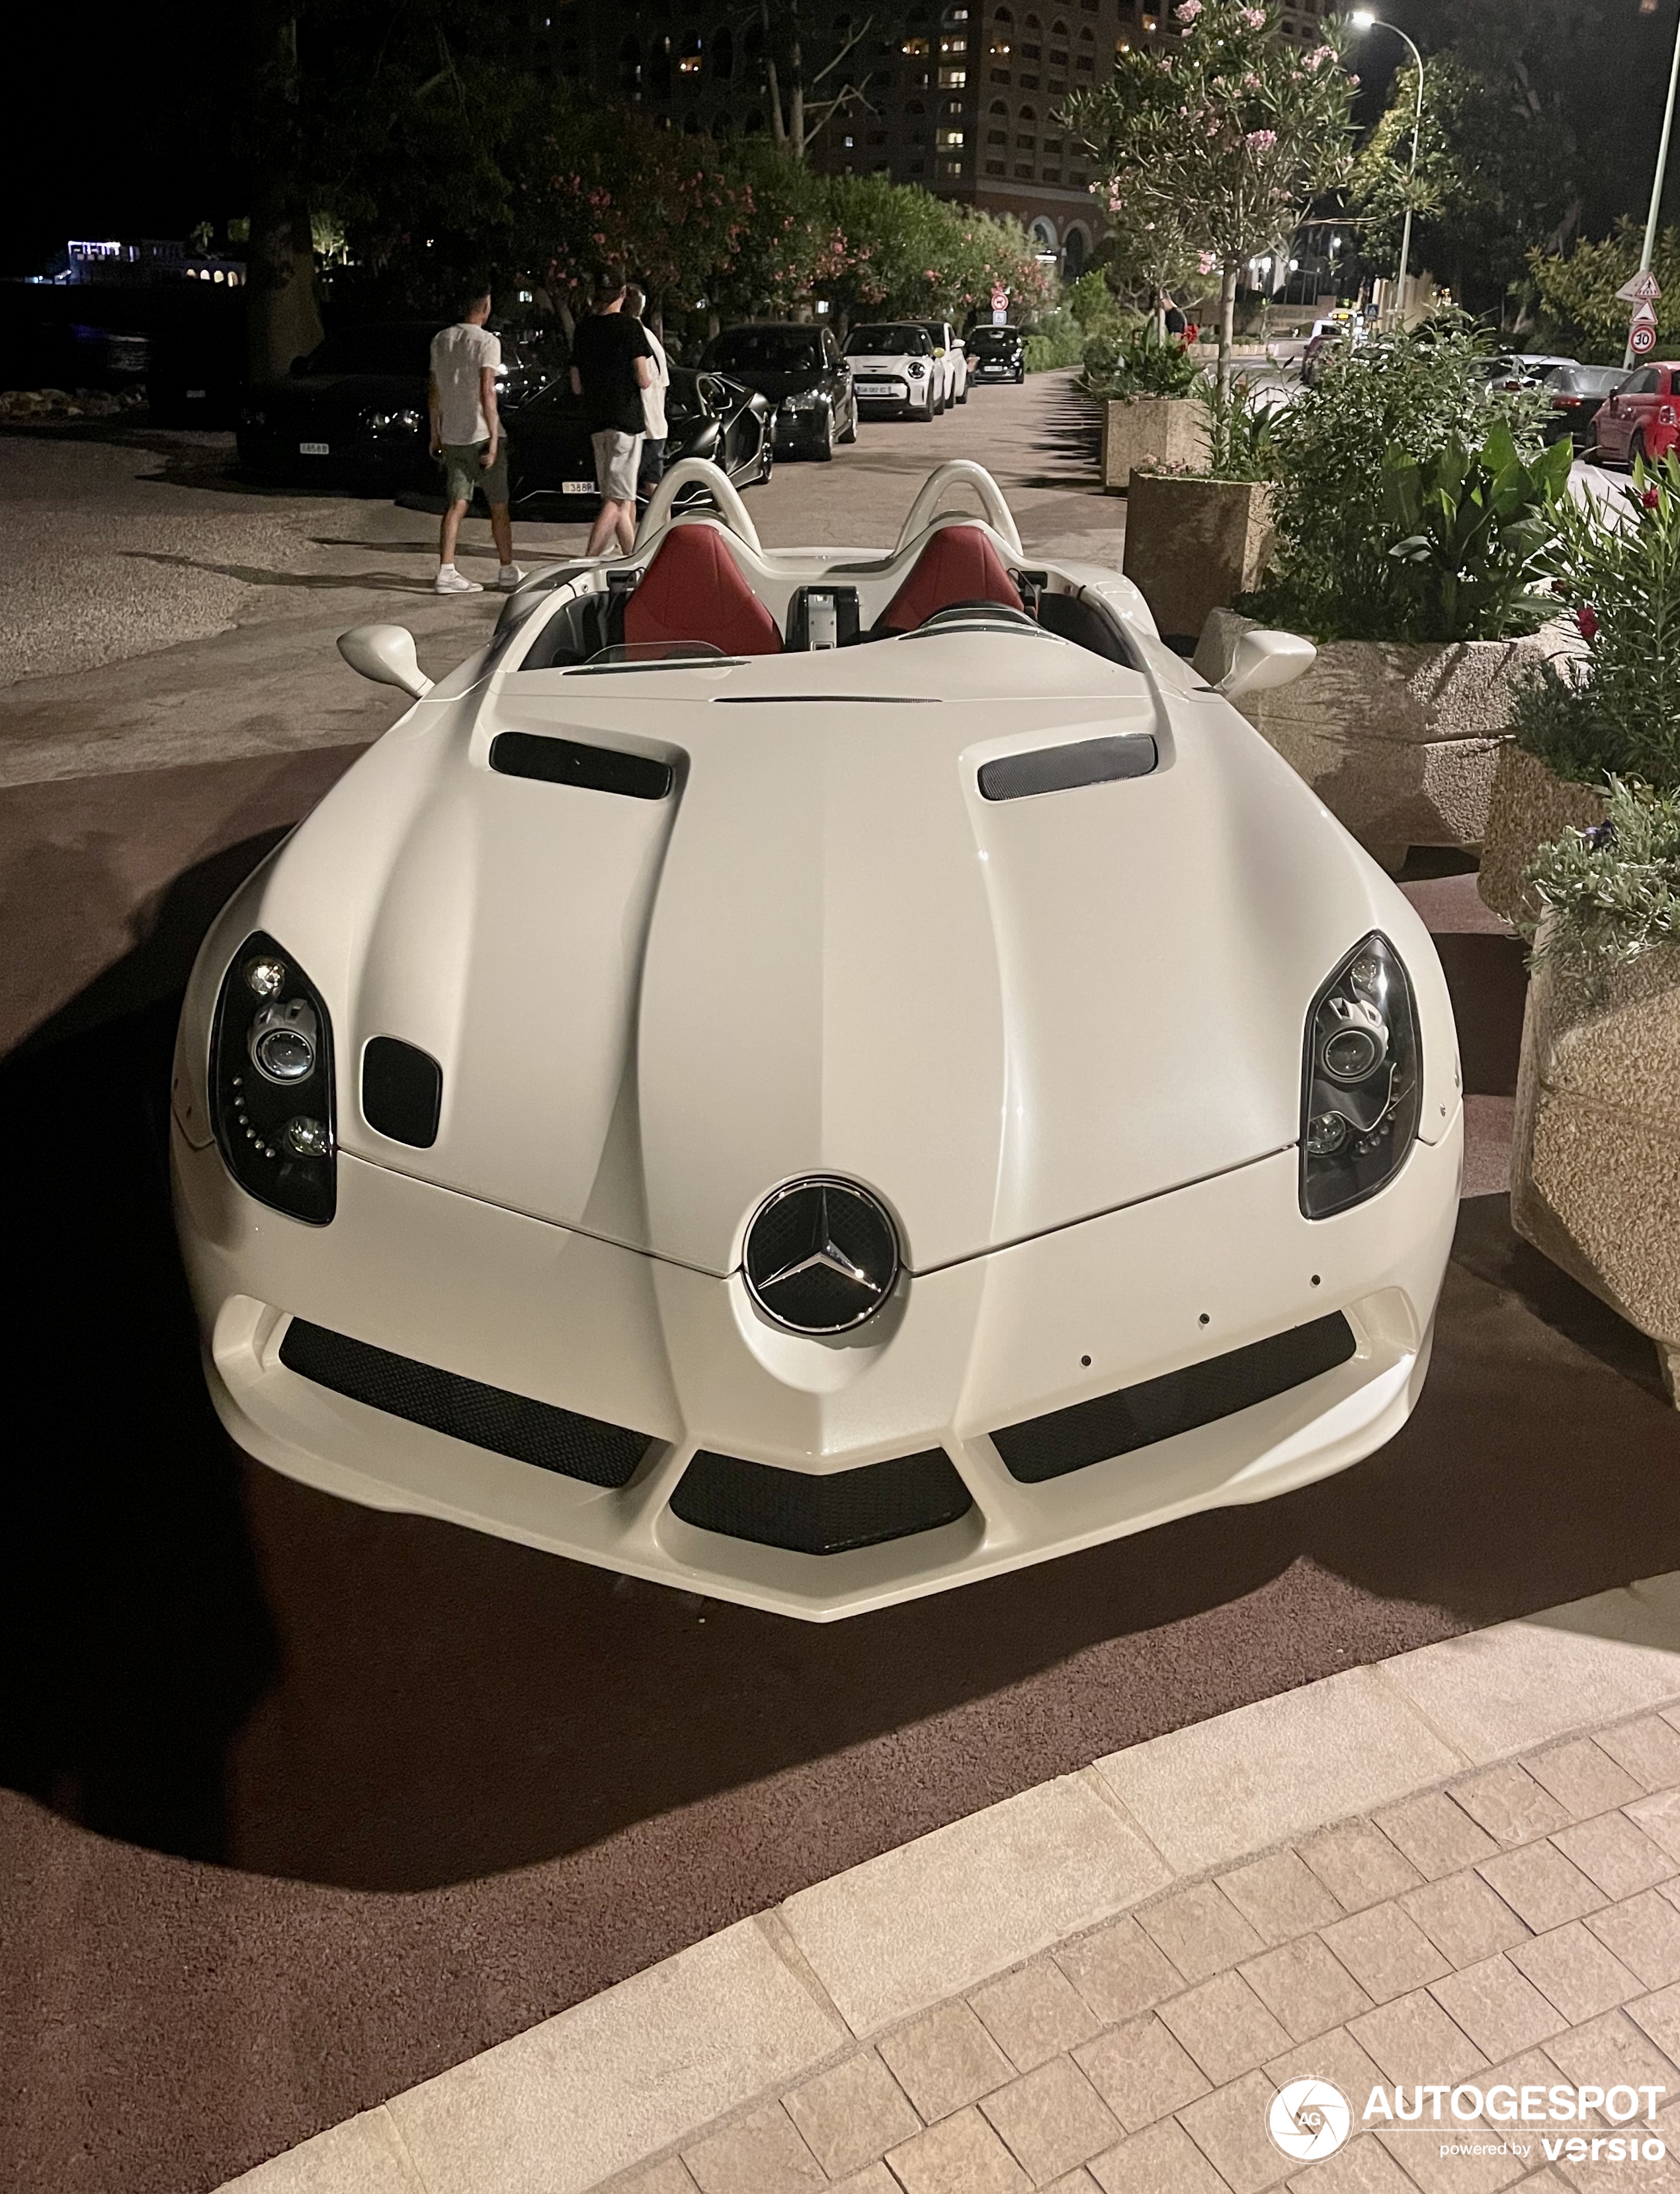 Adrian Sutils Stirling Moss shows up in Monaco